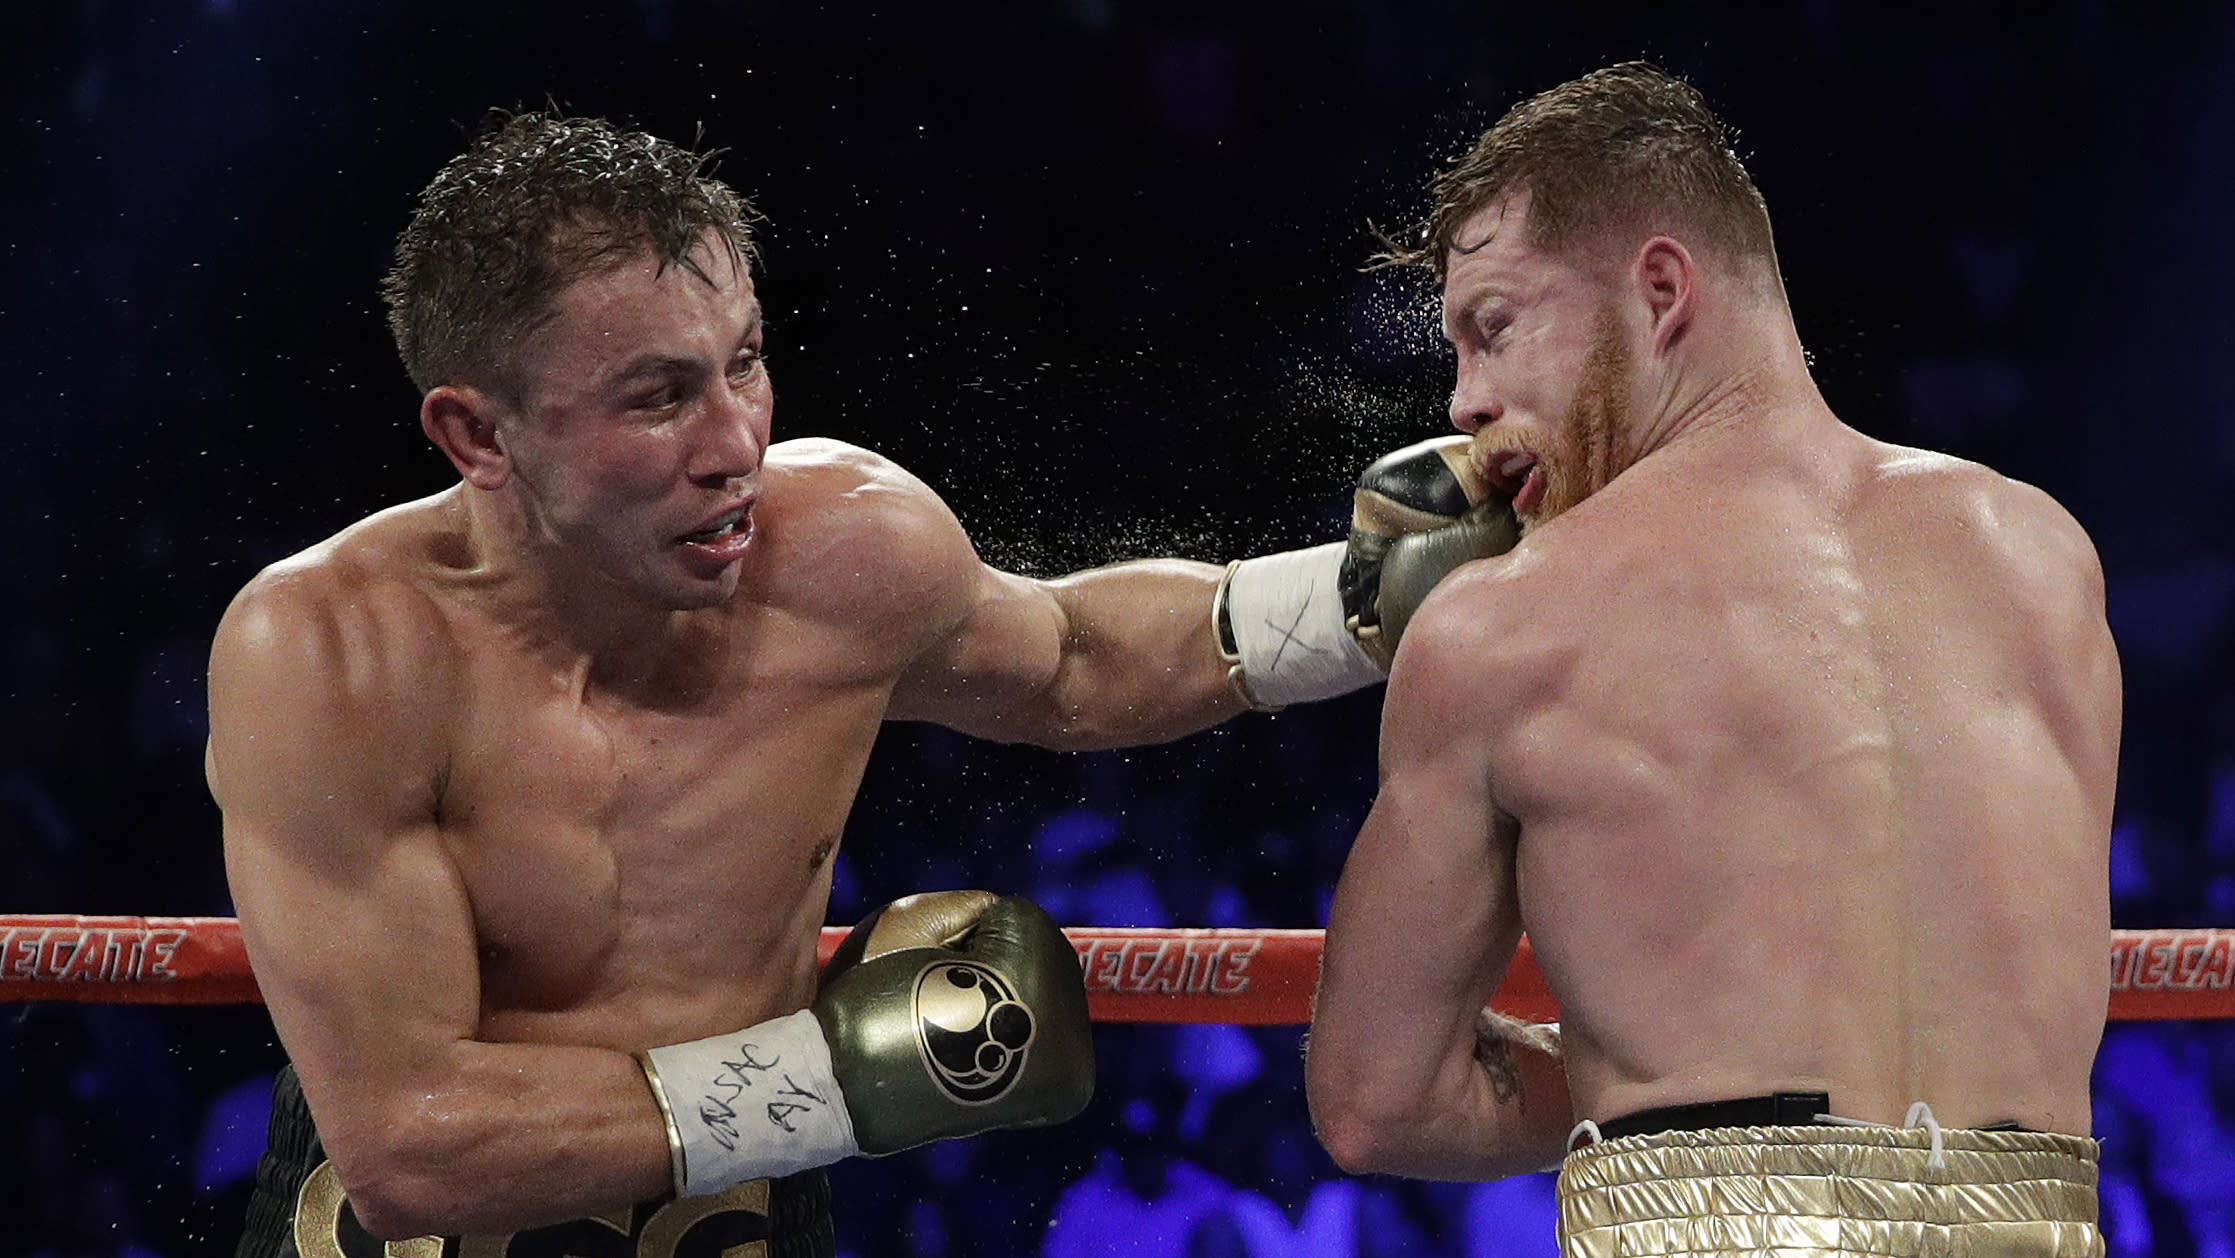 Canelo Alvarez and Gennady Golovkin fight to controversial split draw in thriller